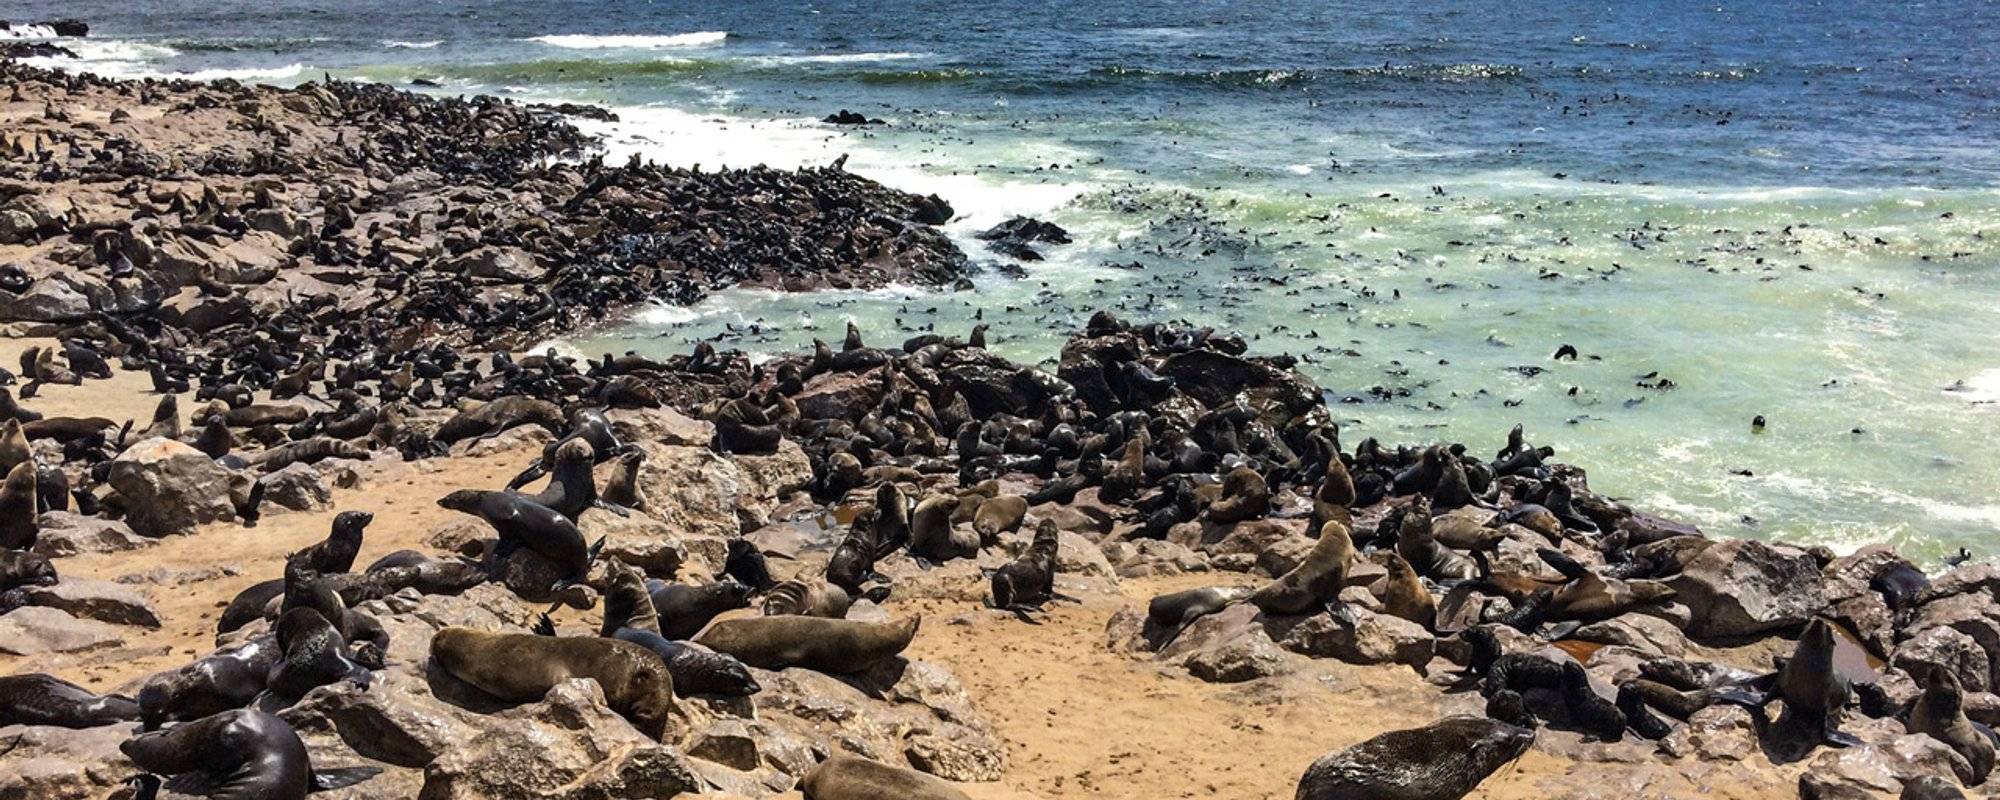 My trip to Namibia (2): Meet the South African fur seal